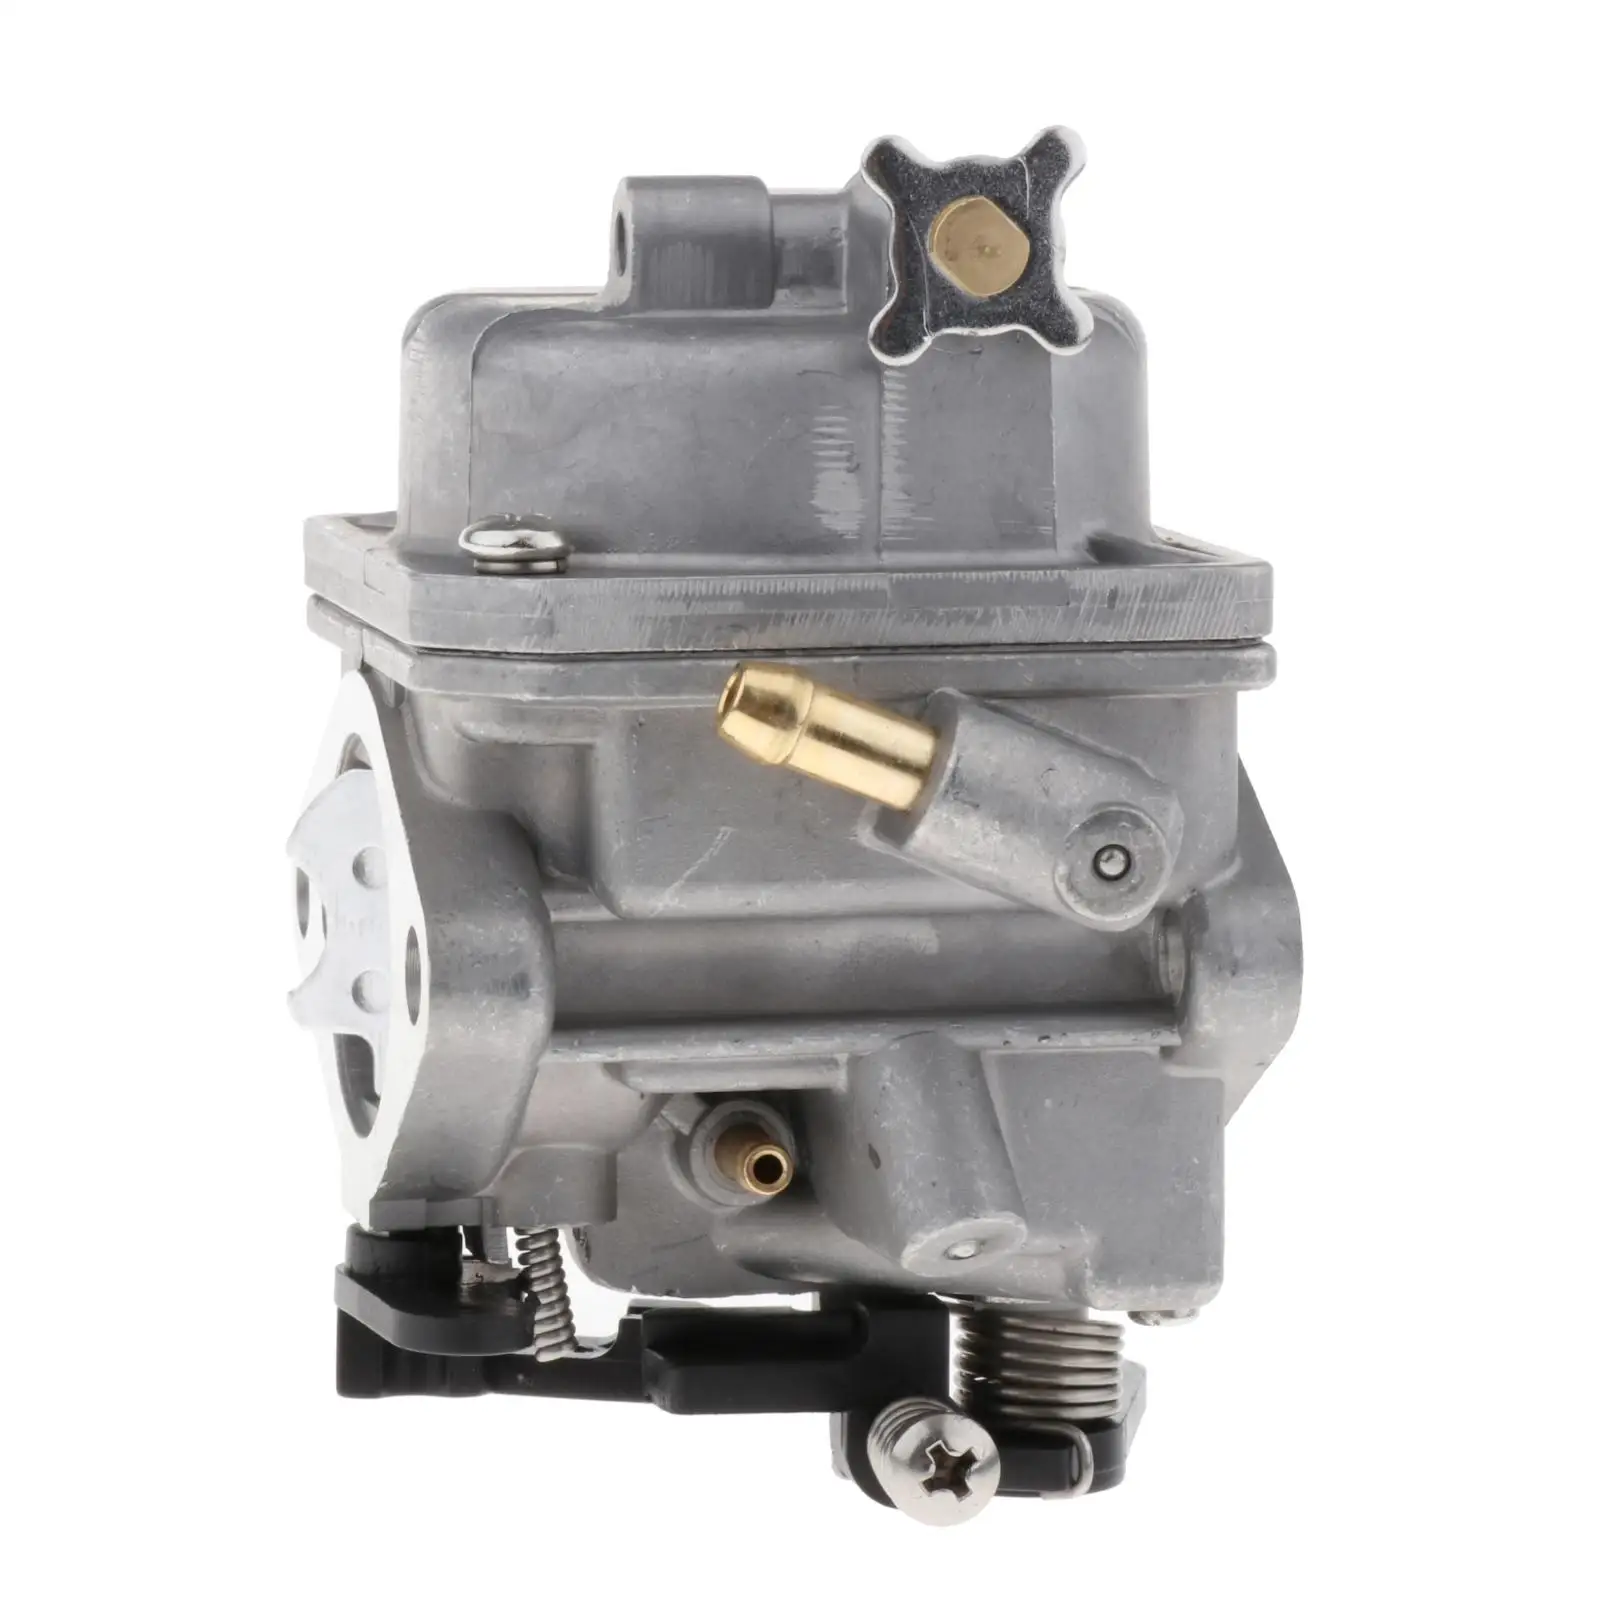 Boat Motor 16100-ZV1-A00 Carburetor Carb Assy for Honda Outboard Engine BC05B BF5 5HP 4-Stroke Boat Accessories